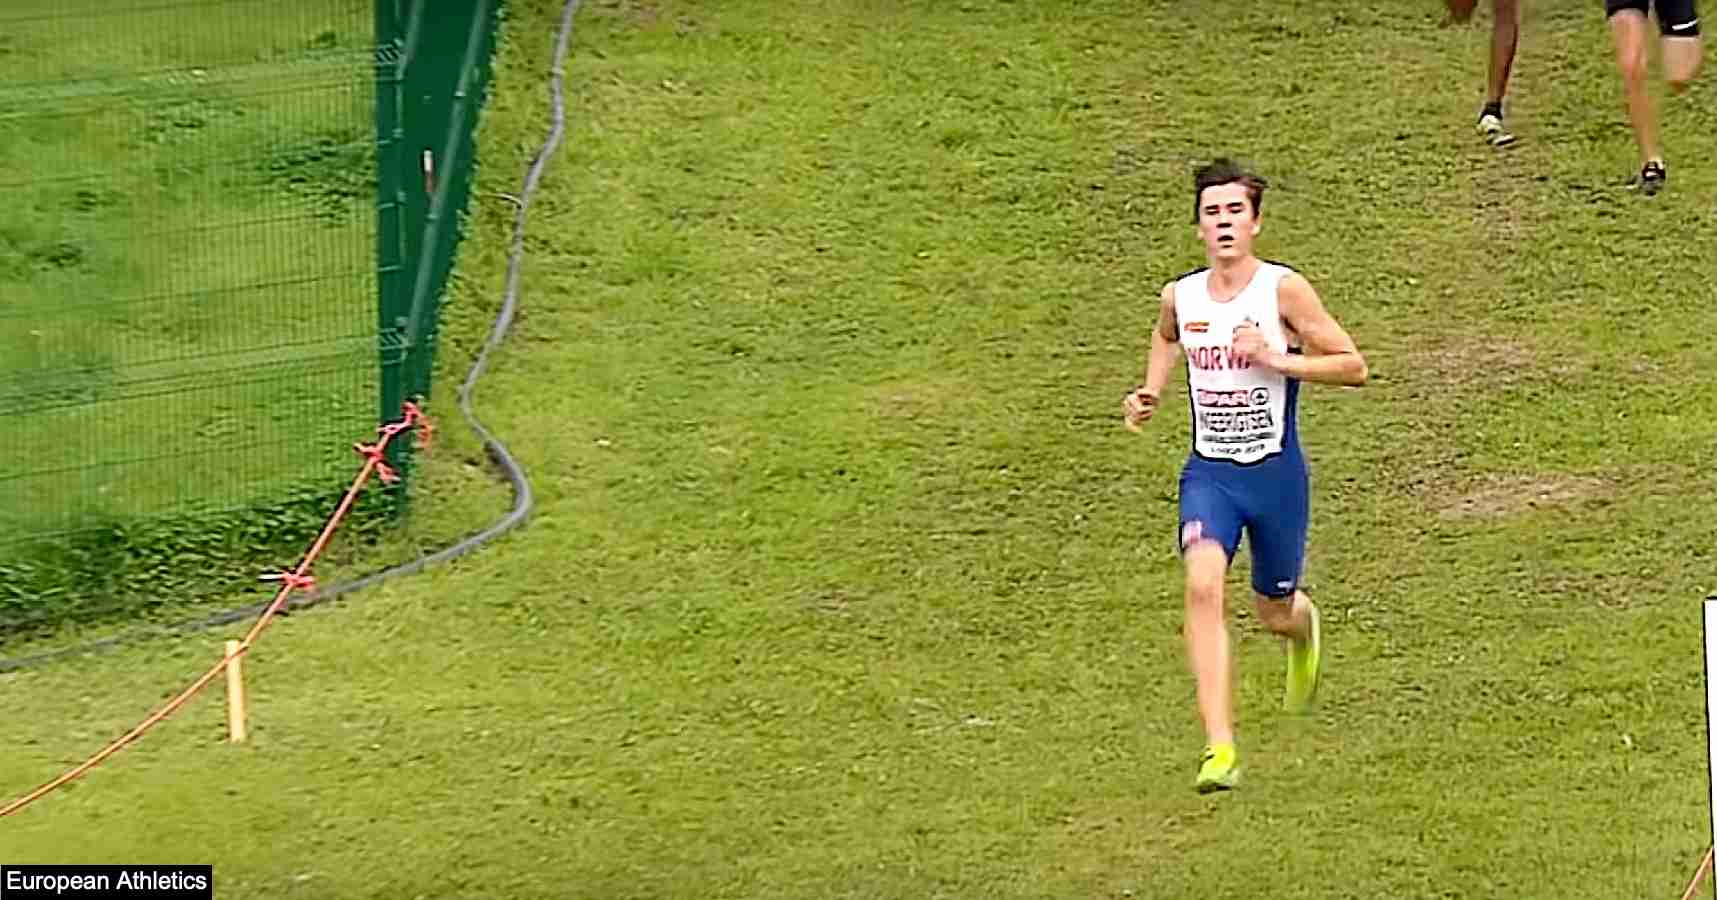 How to watch the 2021 SPAR European Cross Country Championships?